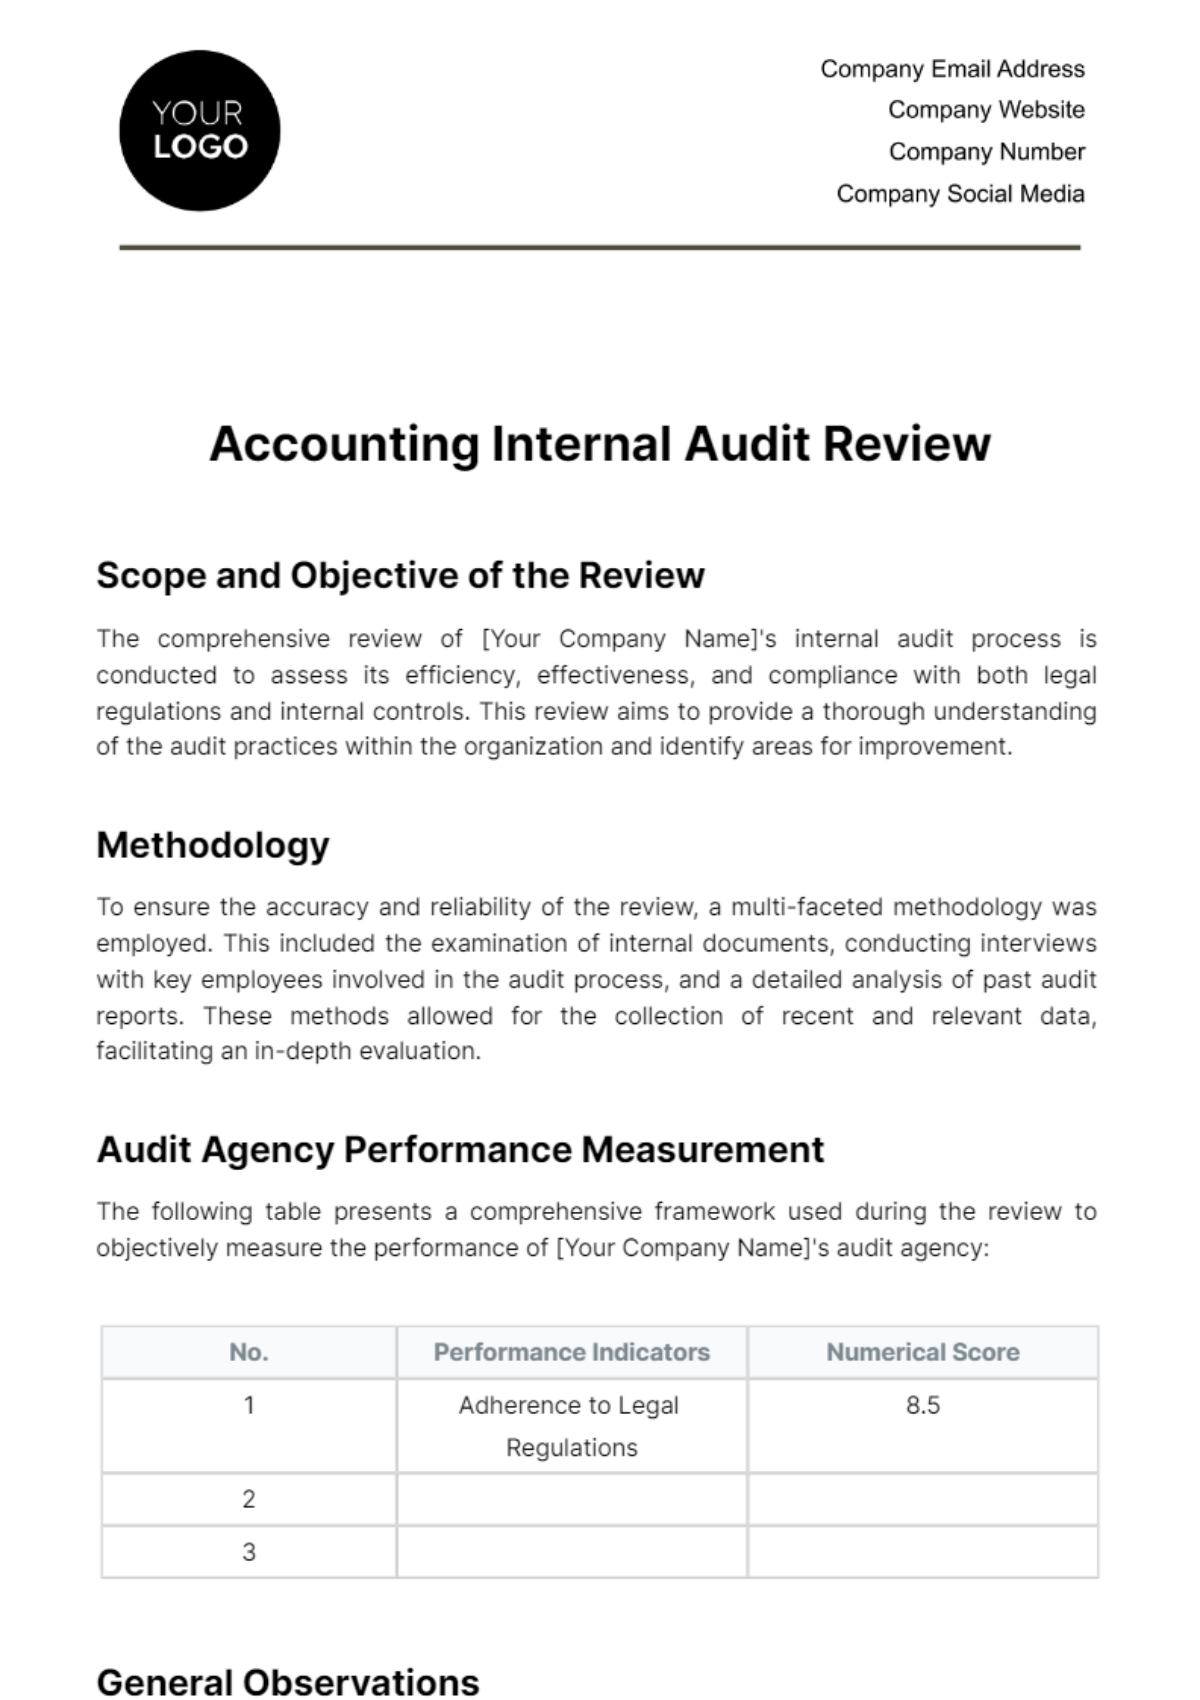 Accounting Internal Audit Review Template